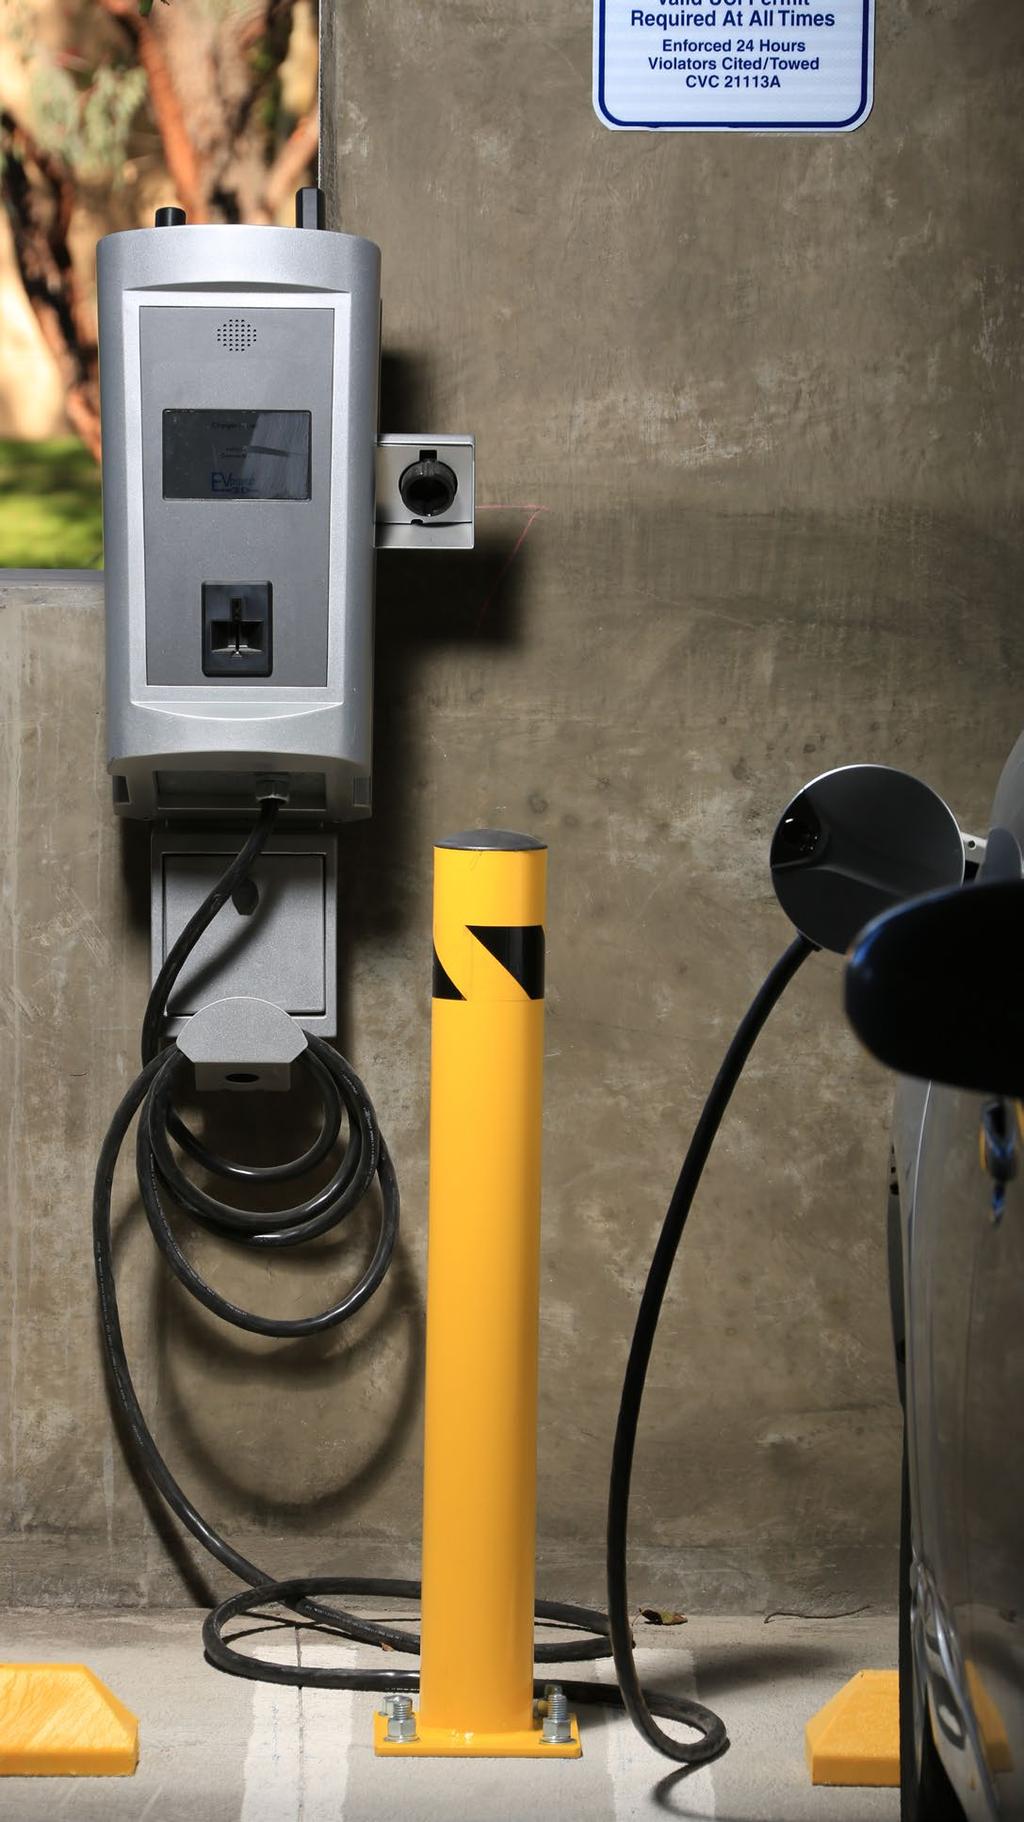 As customers procured their charging stations, SCE s parallel efforts included preparing and requesting customer approval of preliminary designs, preparing and requesting customer execution of